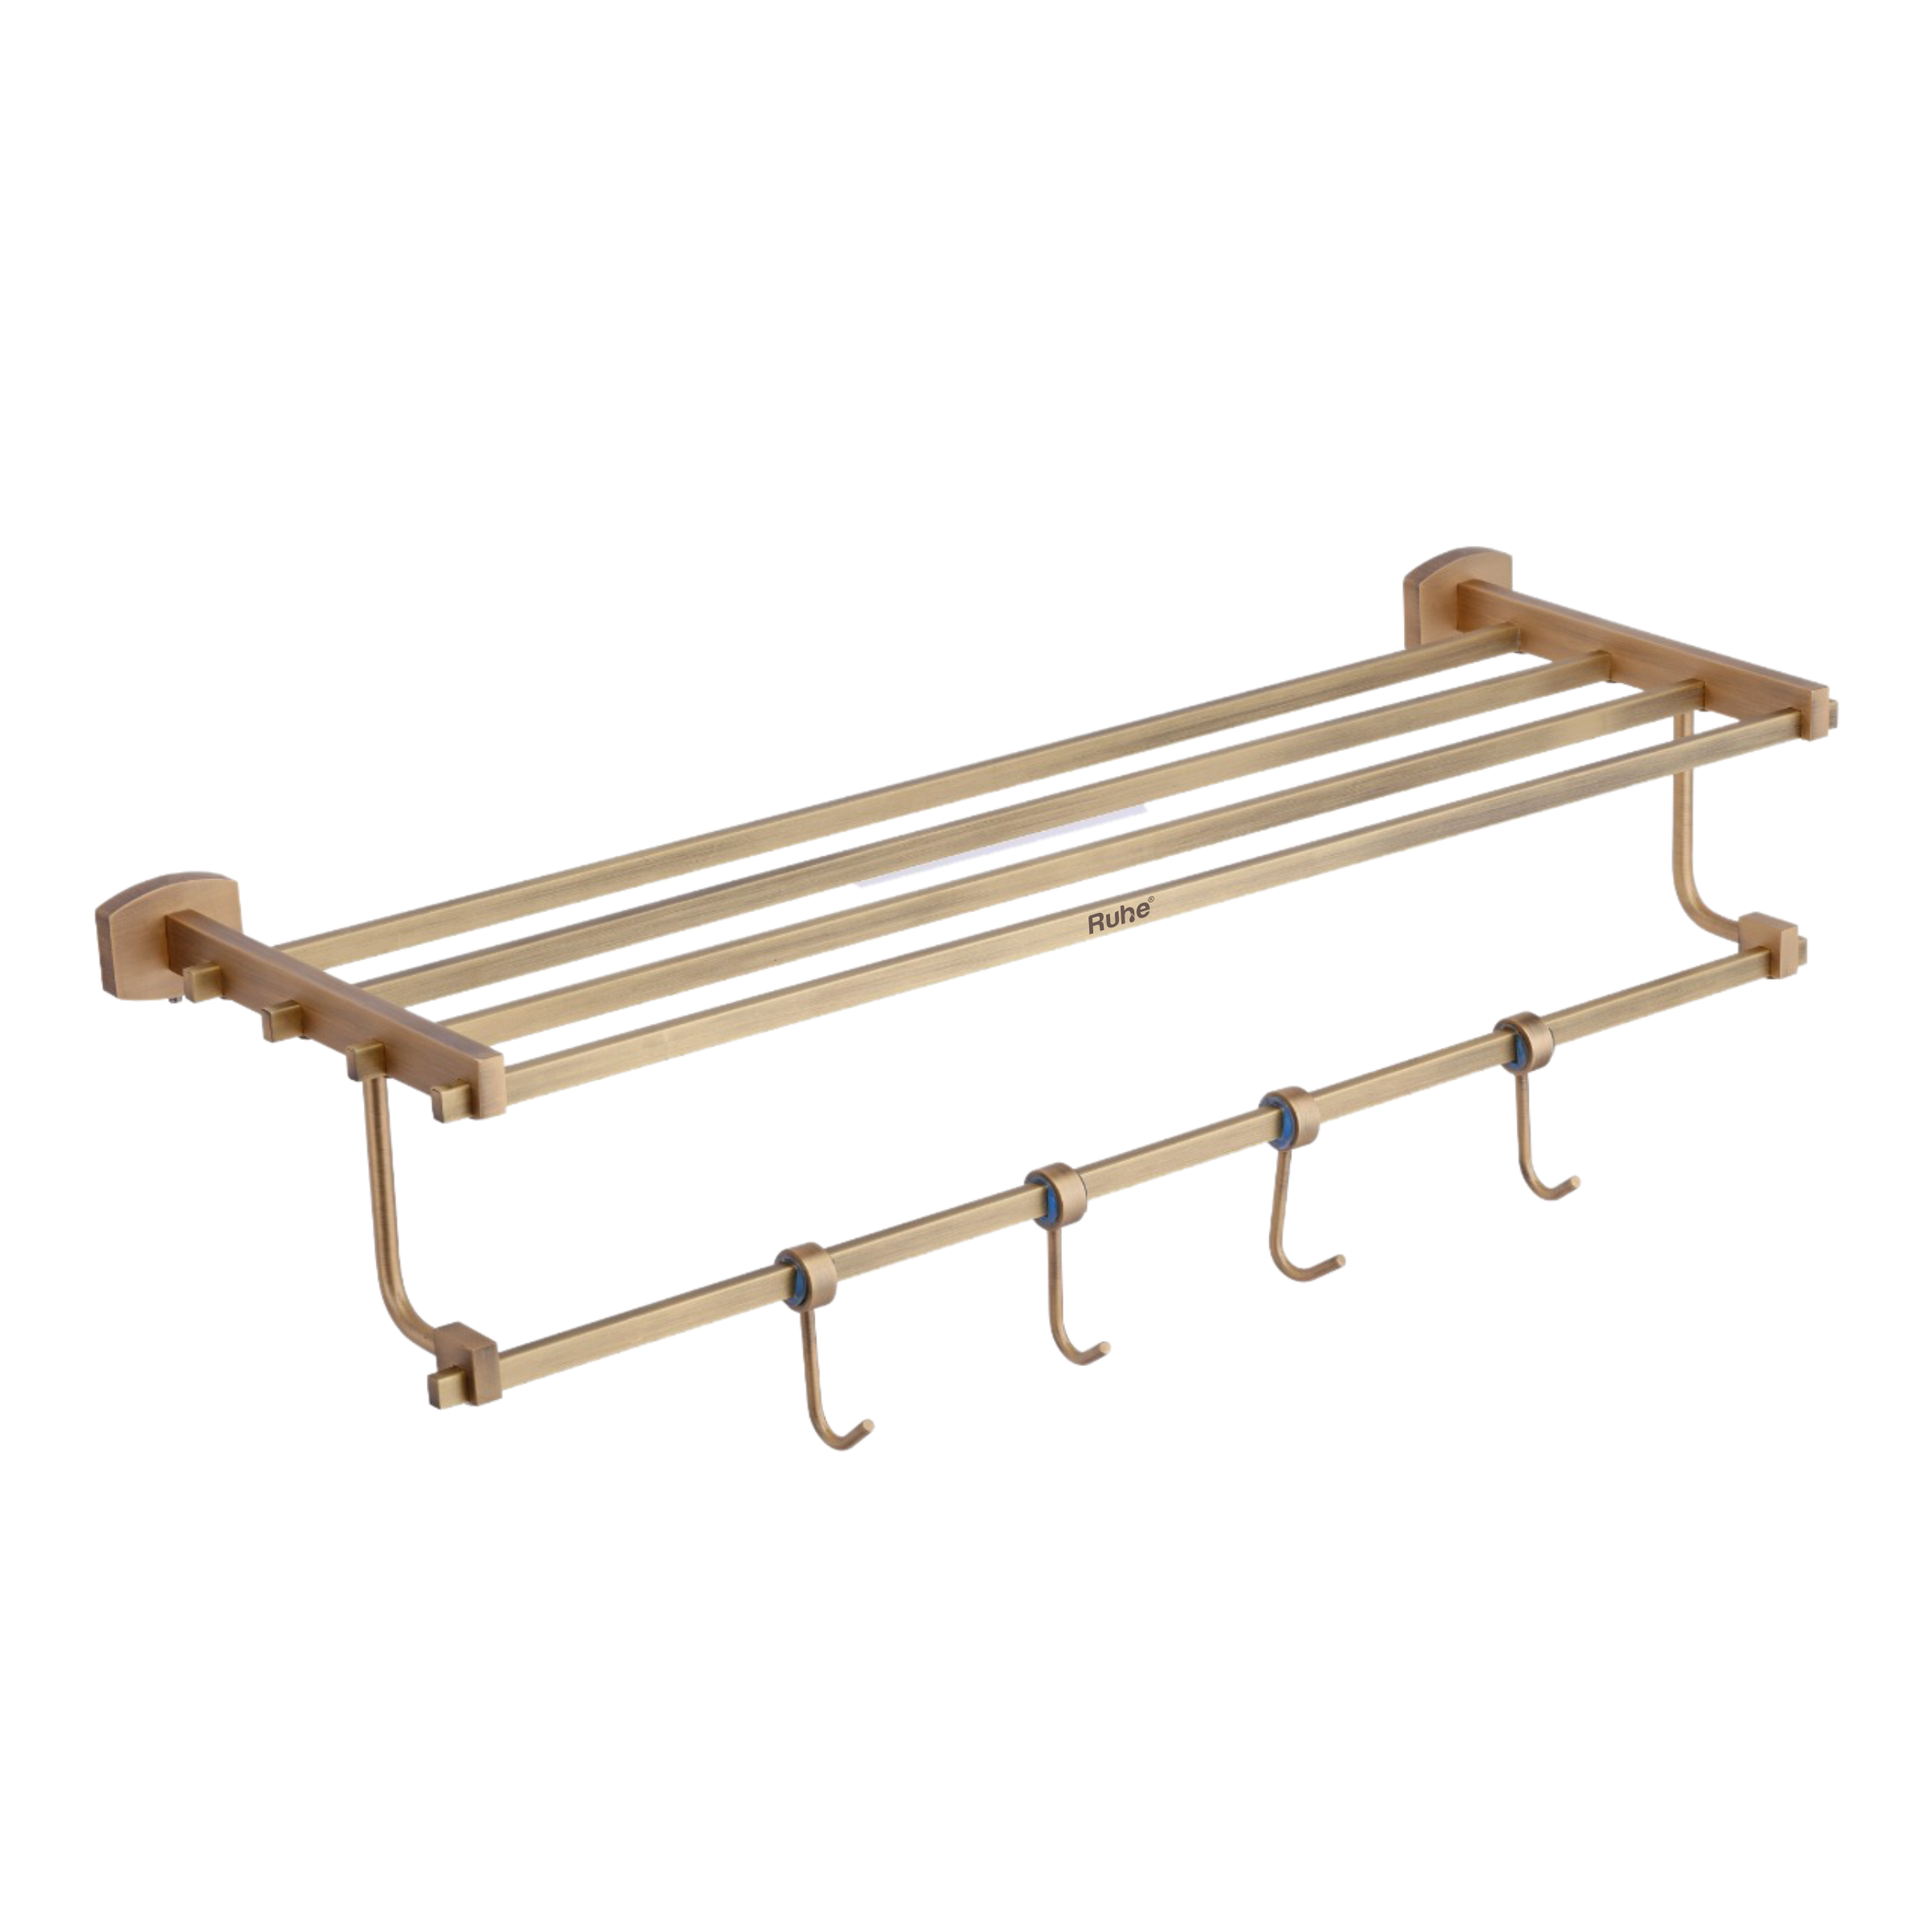 Aura Brass Towel Rack (24 Inches) - by Ruhe